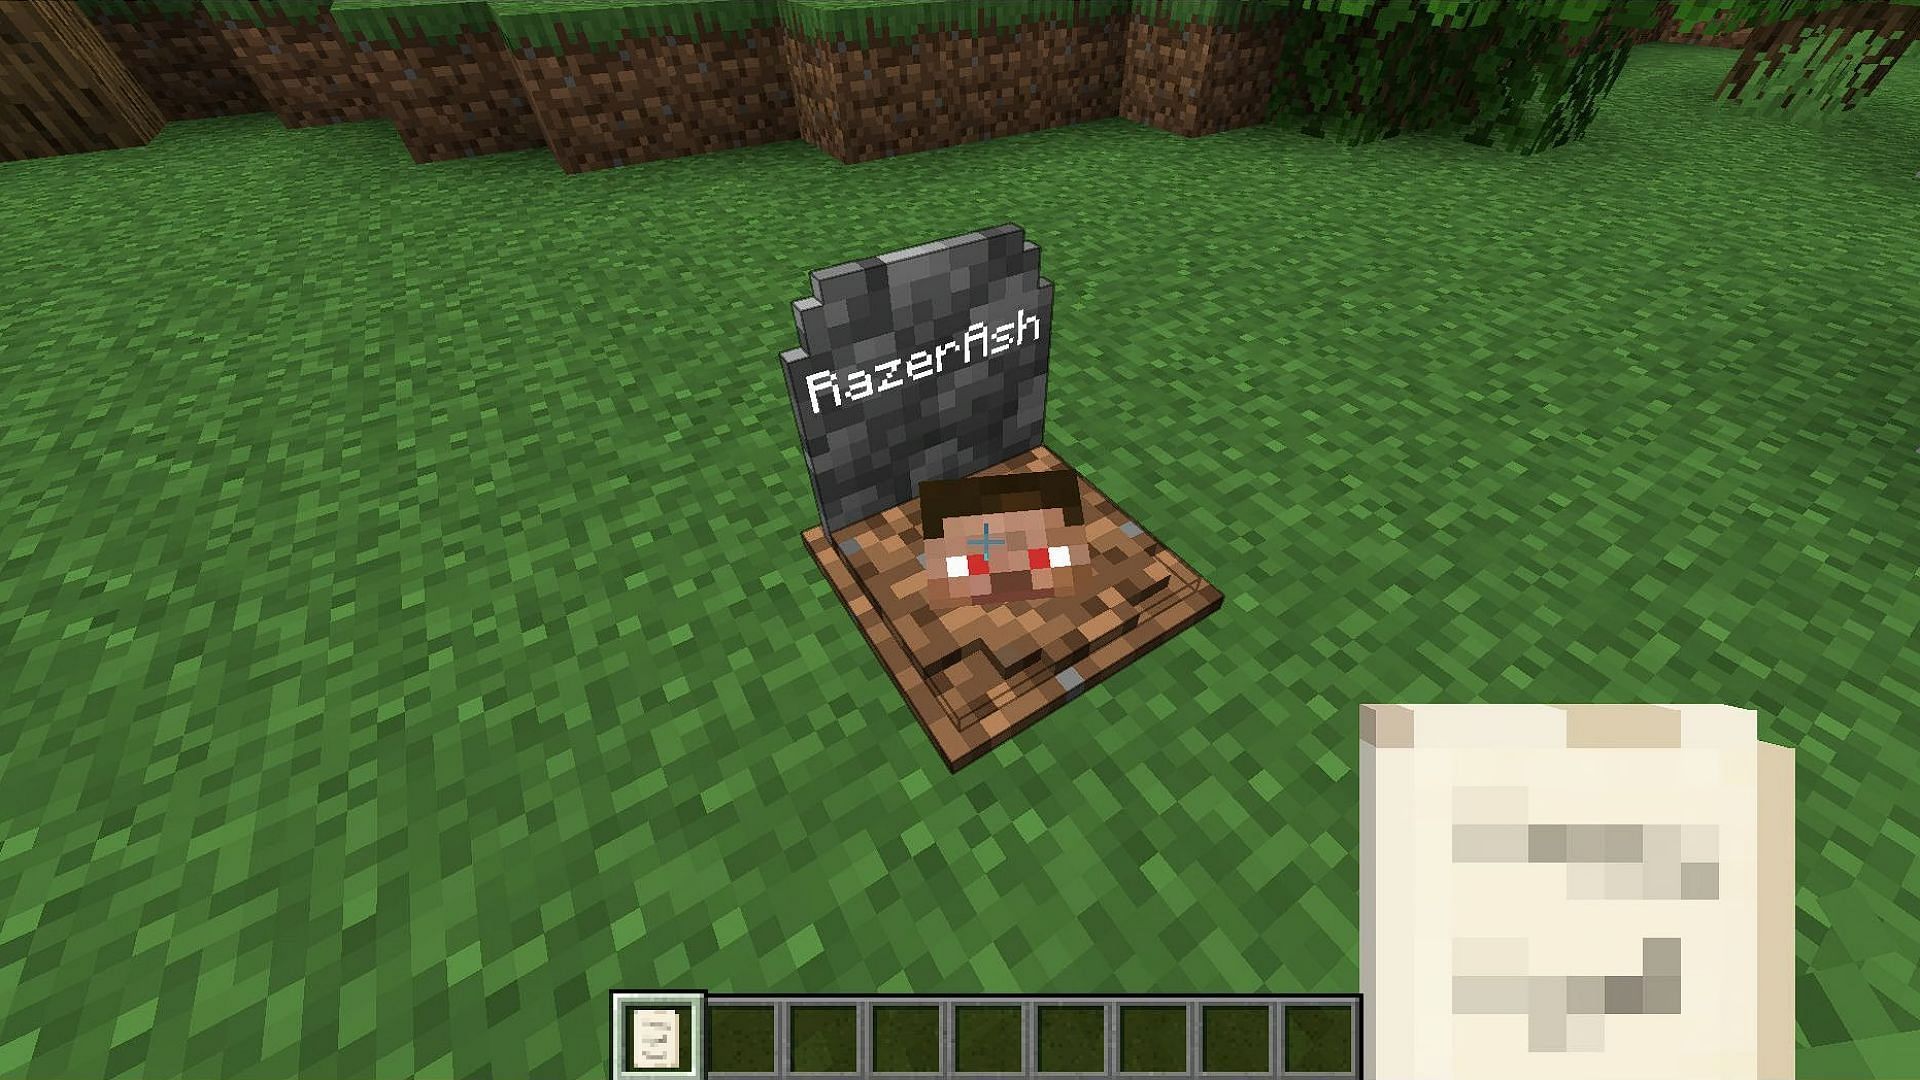 Gravestone mod also protects items dropped by Minecraft players upon death (Image via Mojang)